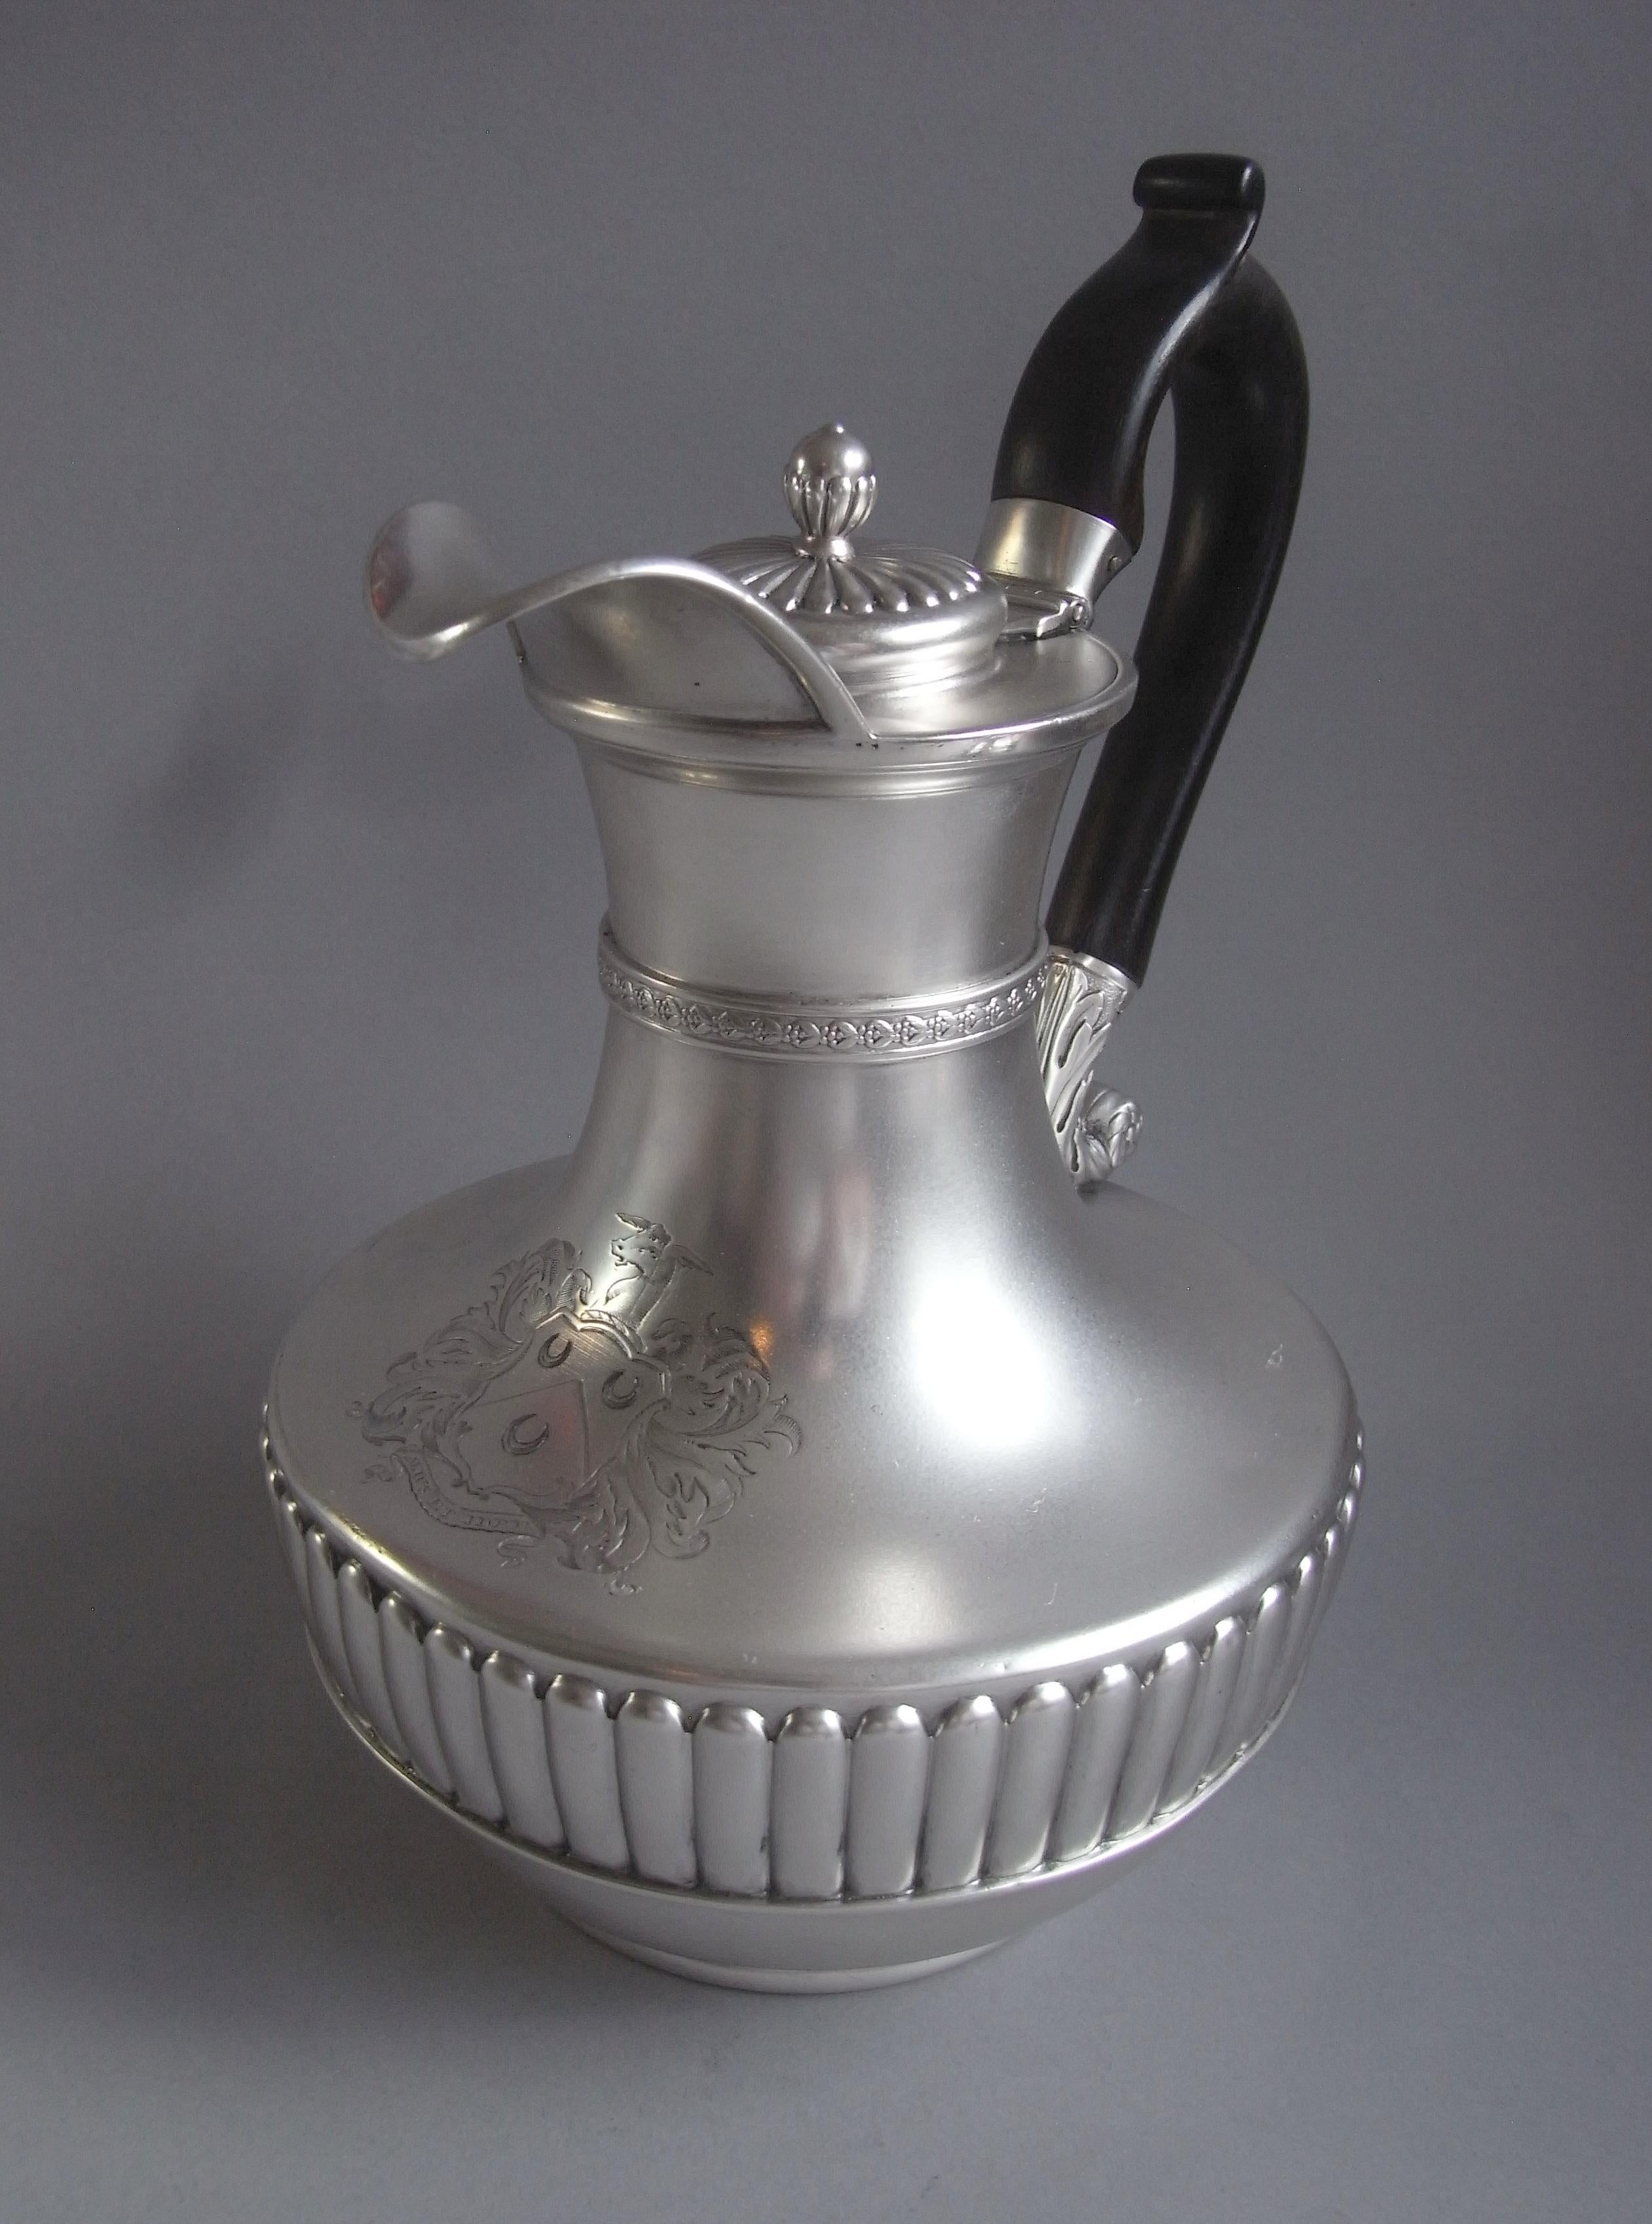 Paul Storr the greatest British silversmith. An exceptional George III Jug on Lampstand made in London in 1807 by Paul Storr.

Paul Storr is widely recognised as the greatest British silversmith of all time and his designs and quality of